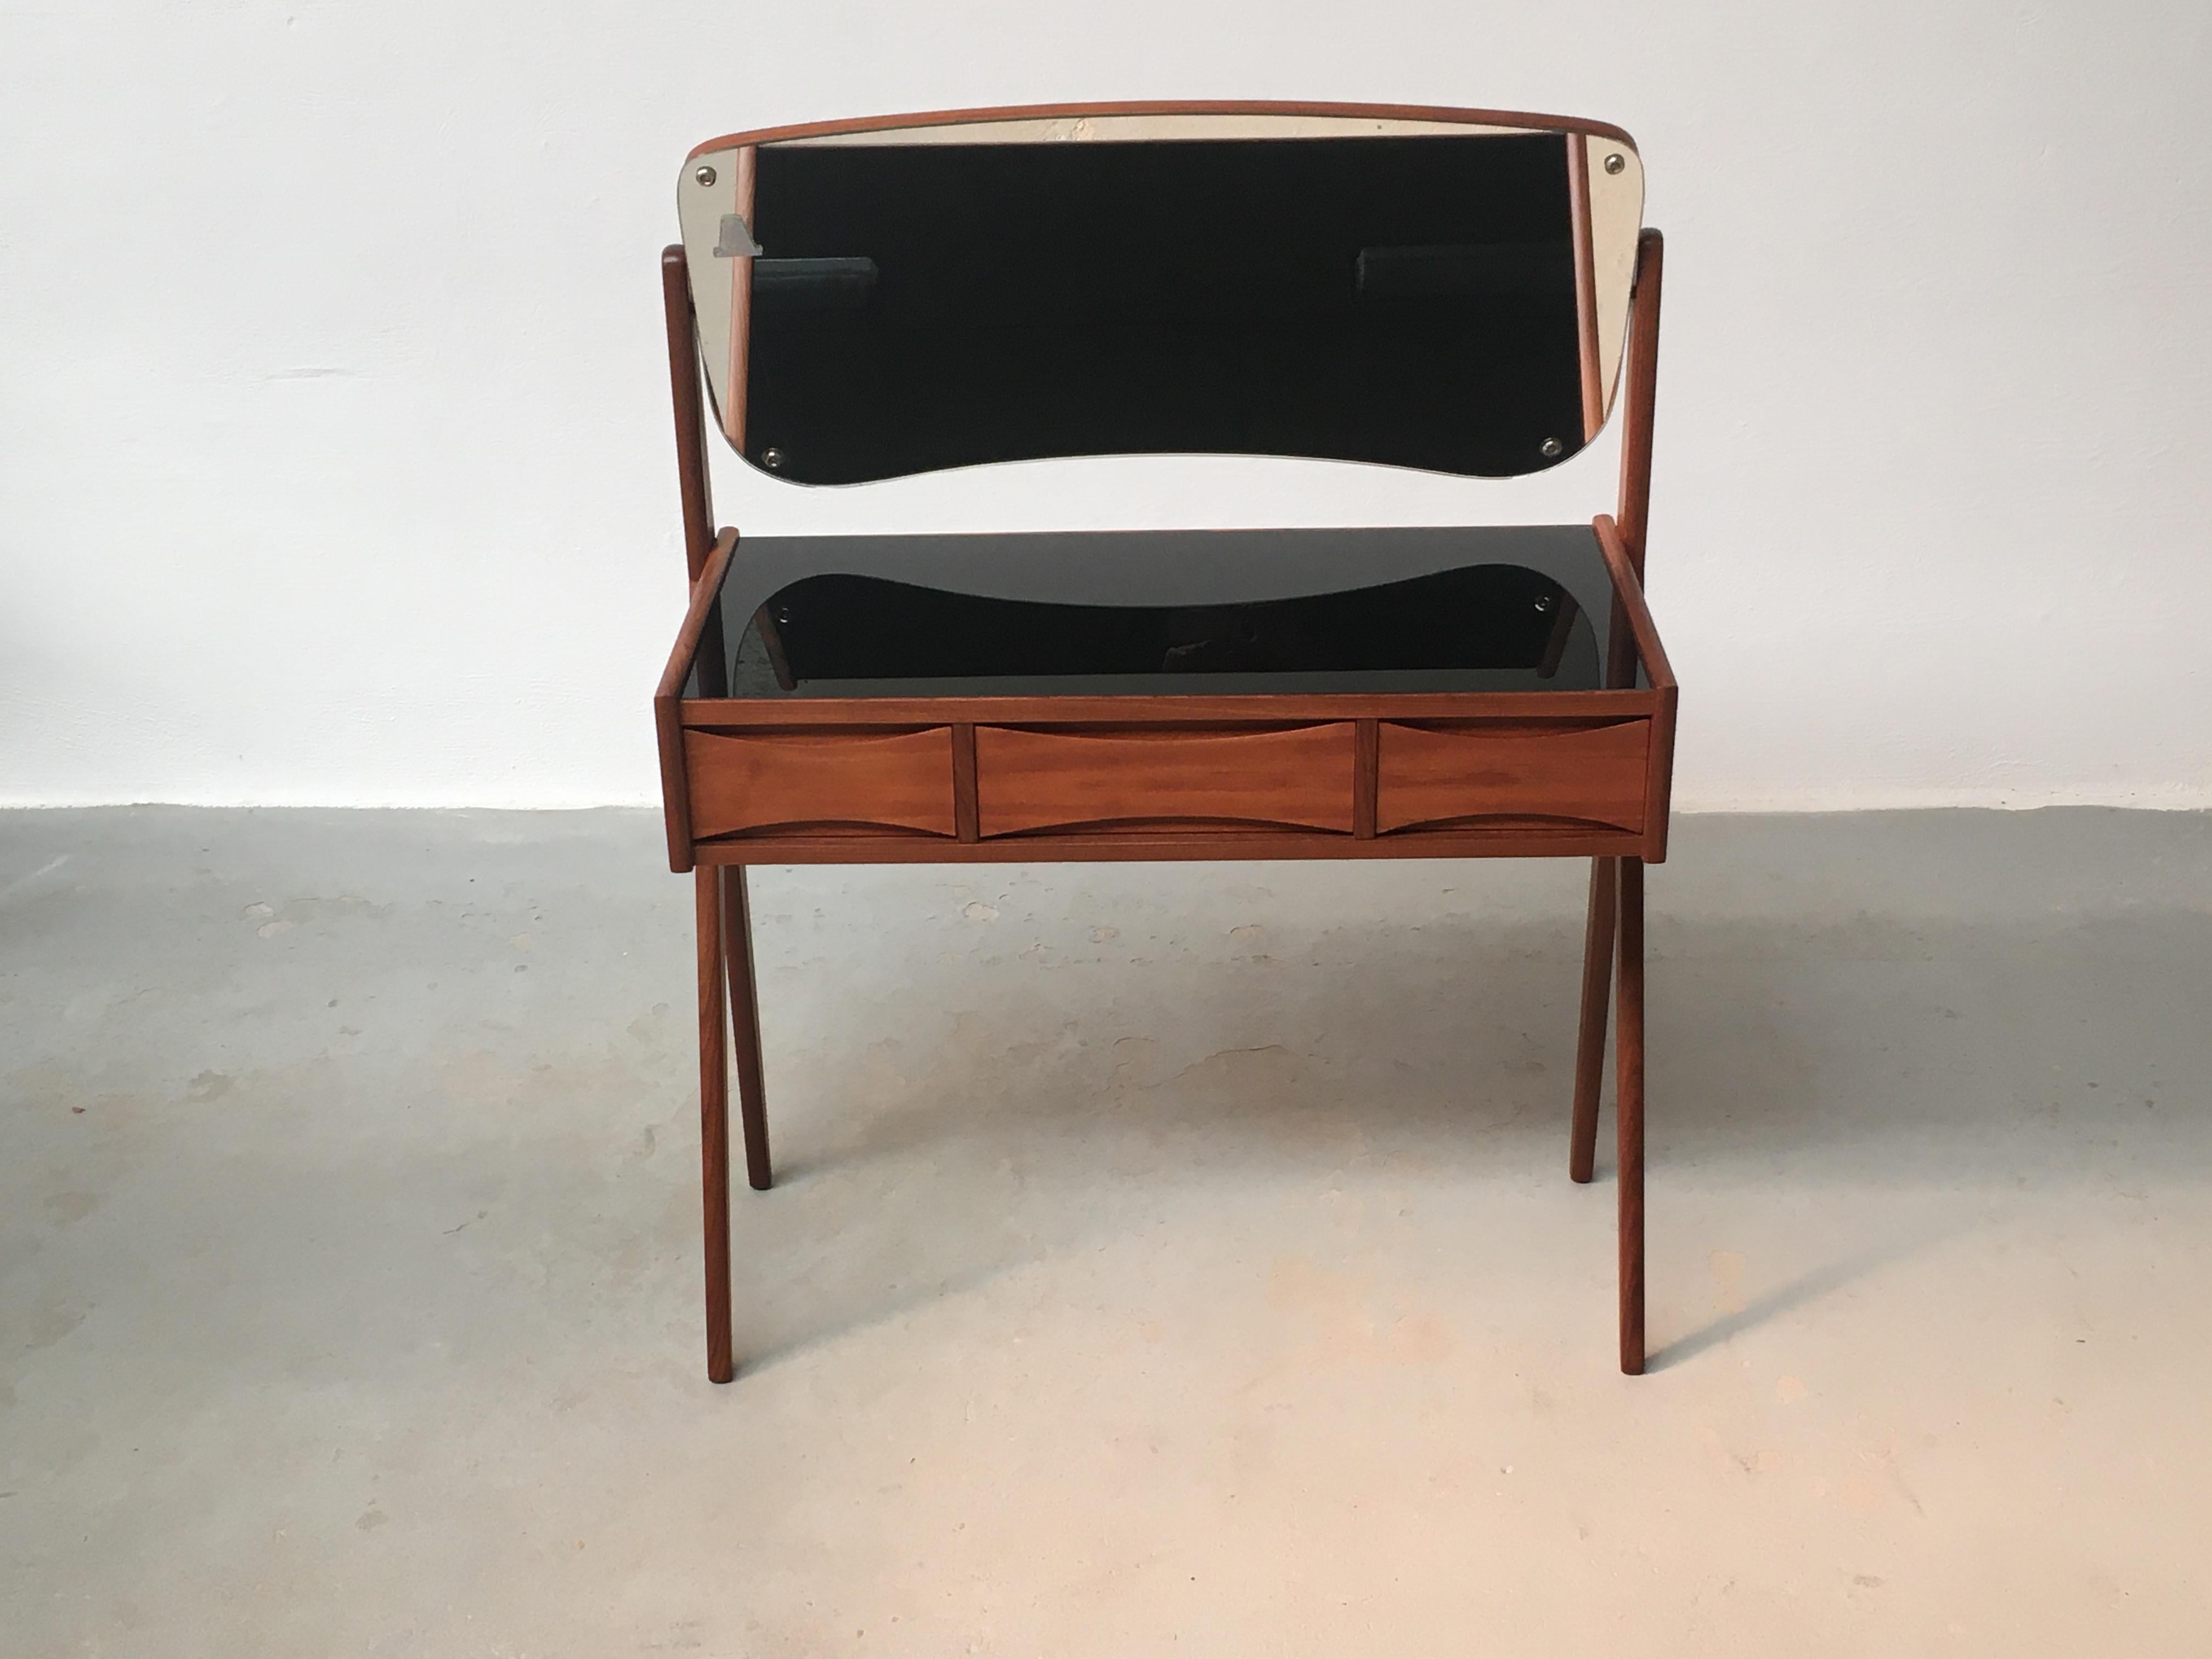 1960s Fully Restored Arne Vodder Teak dressing table by Oelholm Moebelfabrik designed in the 1950´s.

Elegant teak dressing-/vanity table with spilt legs, adjustable mirror and the quintessential bow tie grips on drawers top and bottom that are